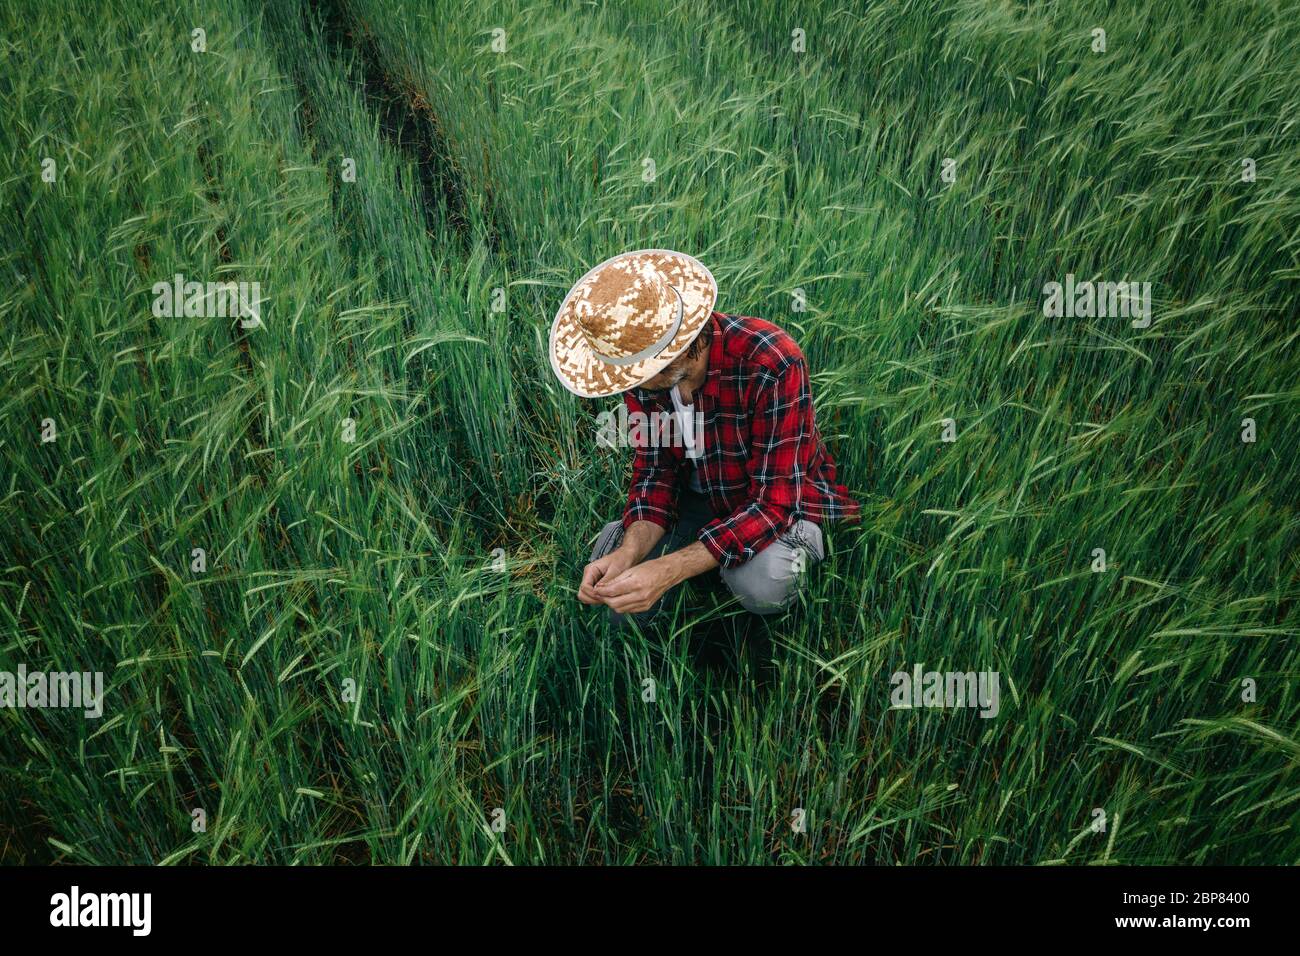 Farmer inspecting green barley crop development in field, adult male agronomist with straw hat and plaid shirt working on farmland Stock Photo